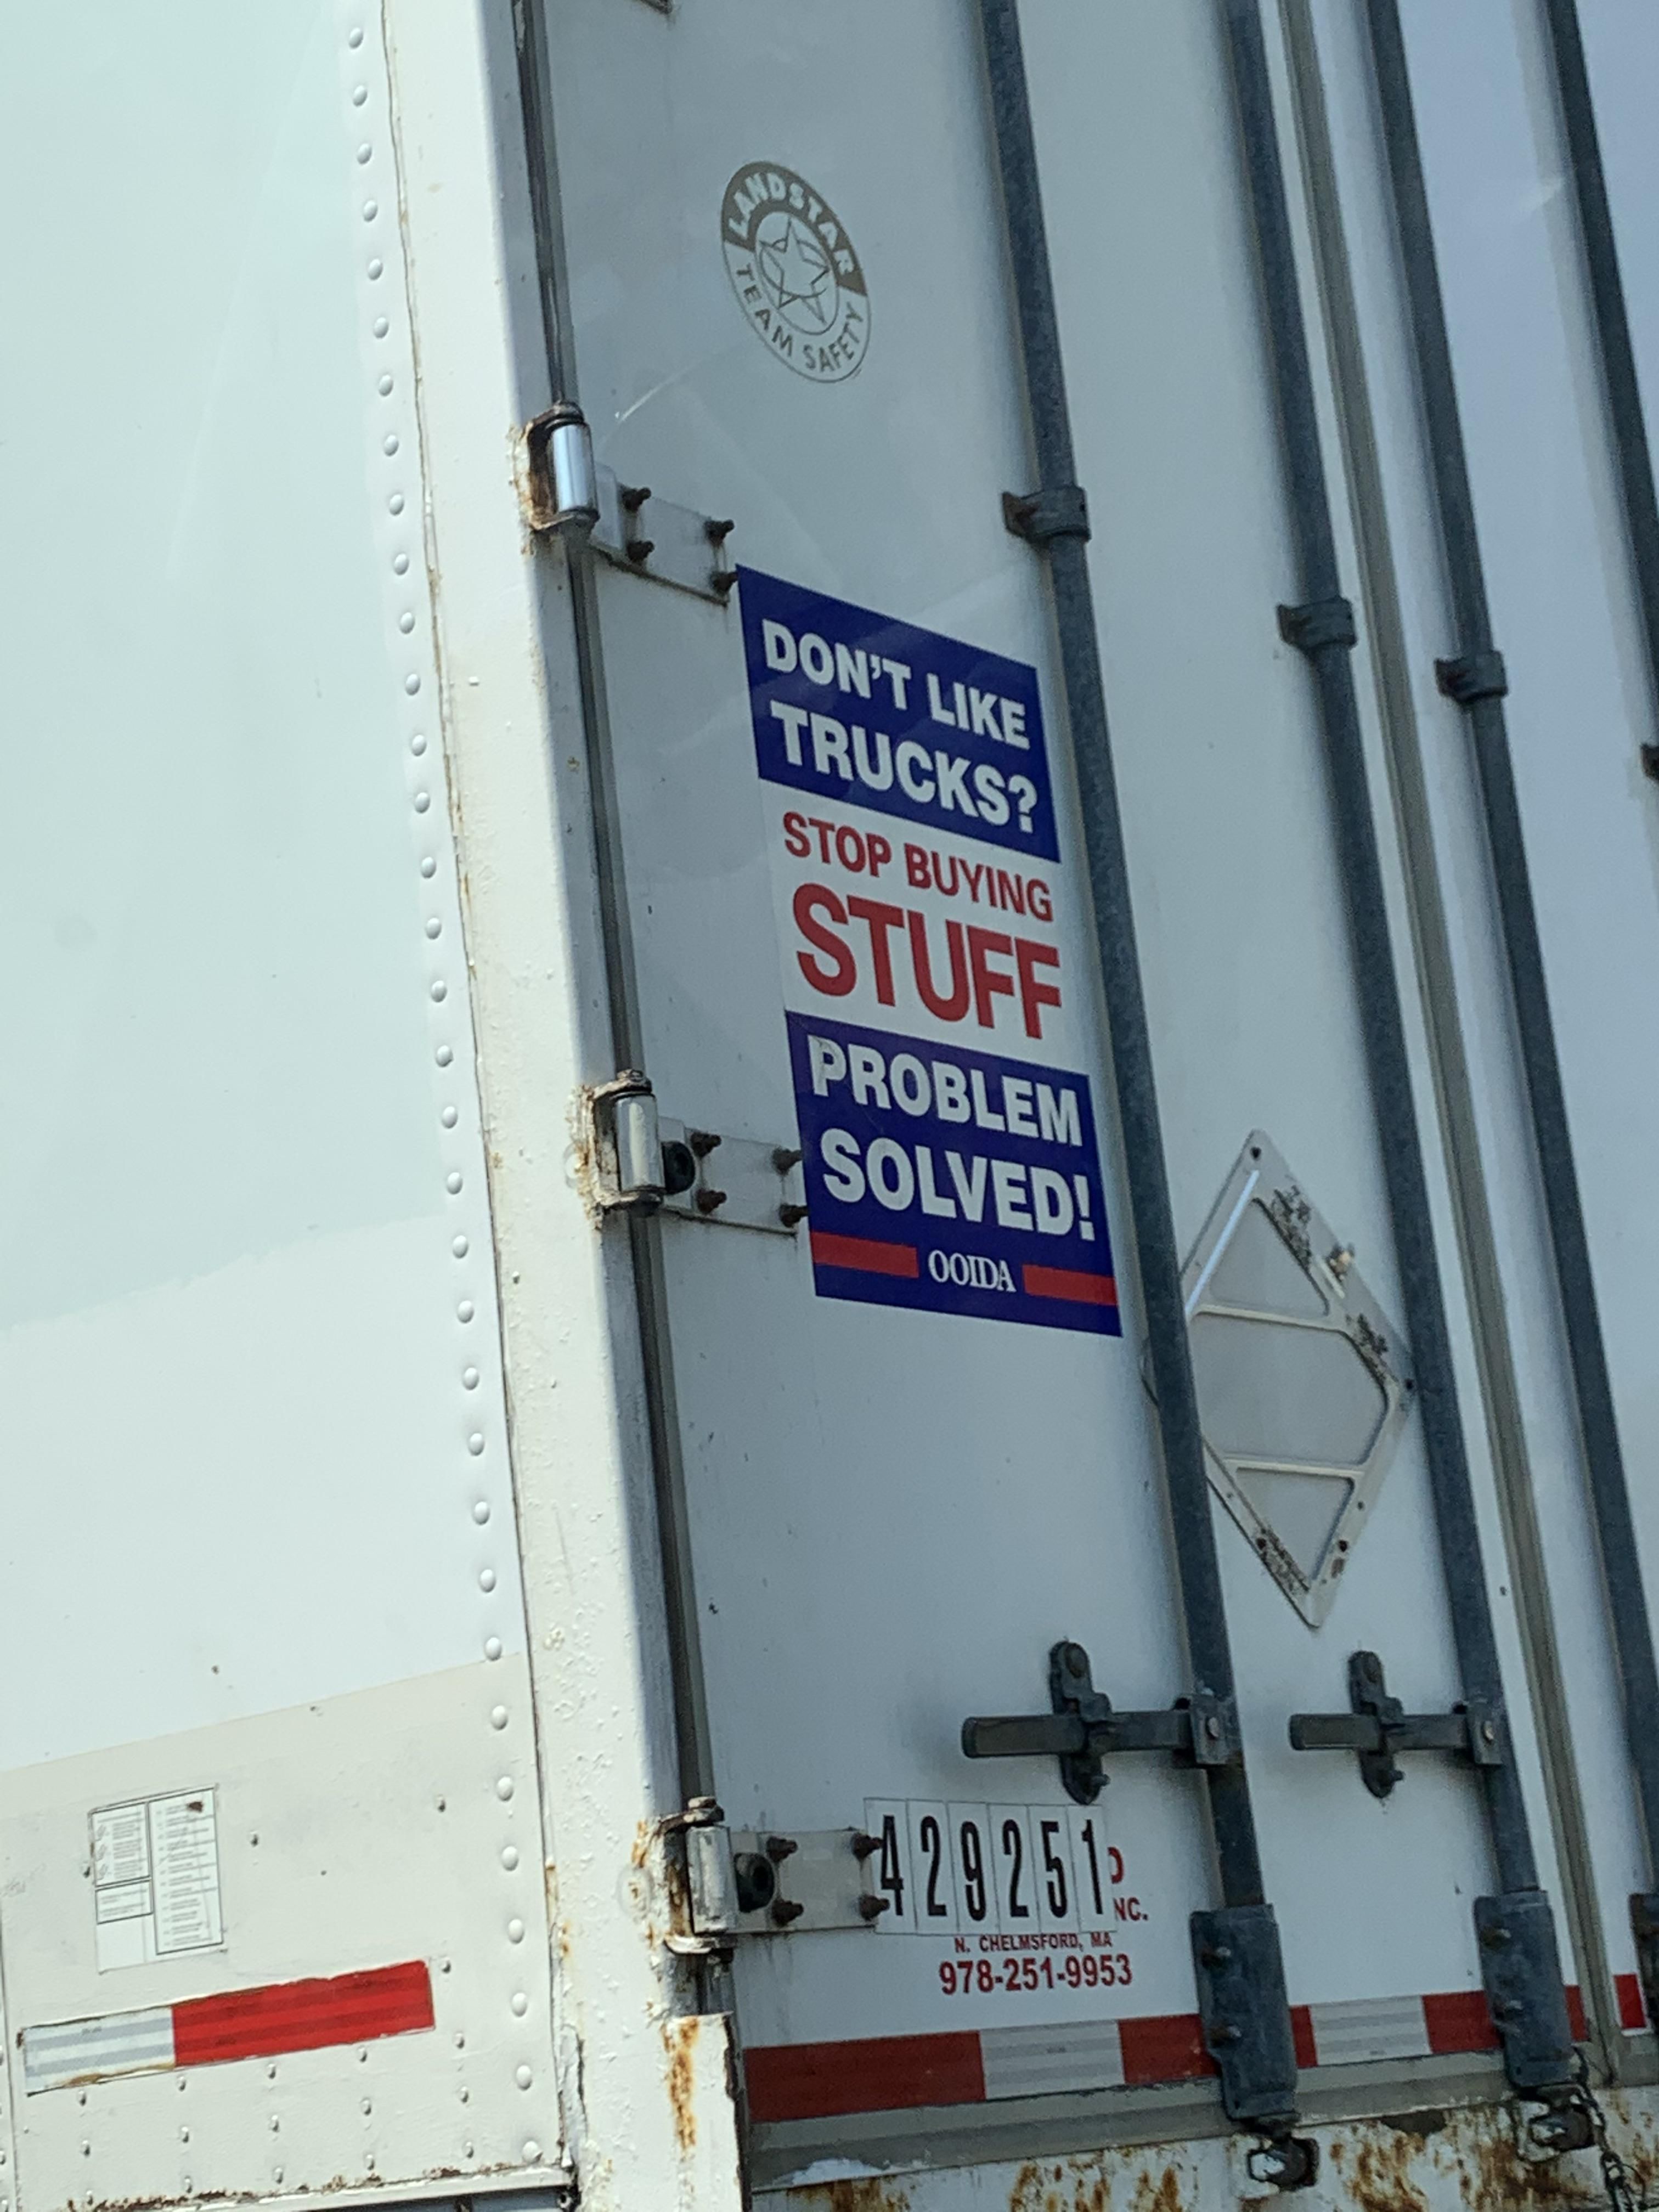 A truck I saw while in traffic